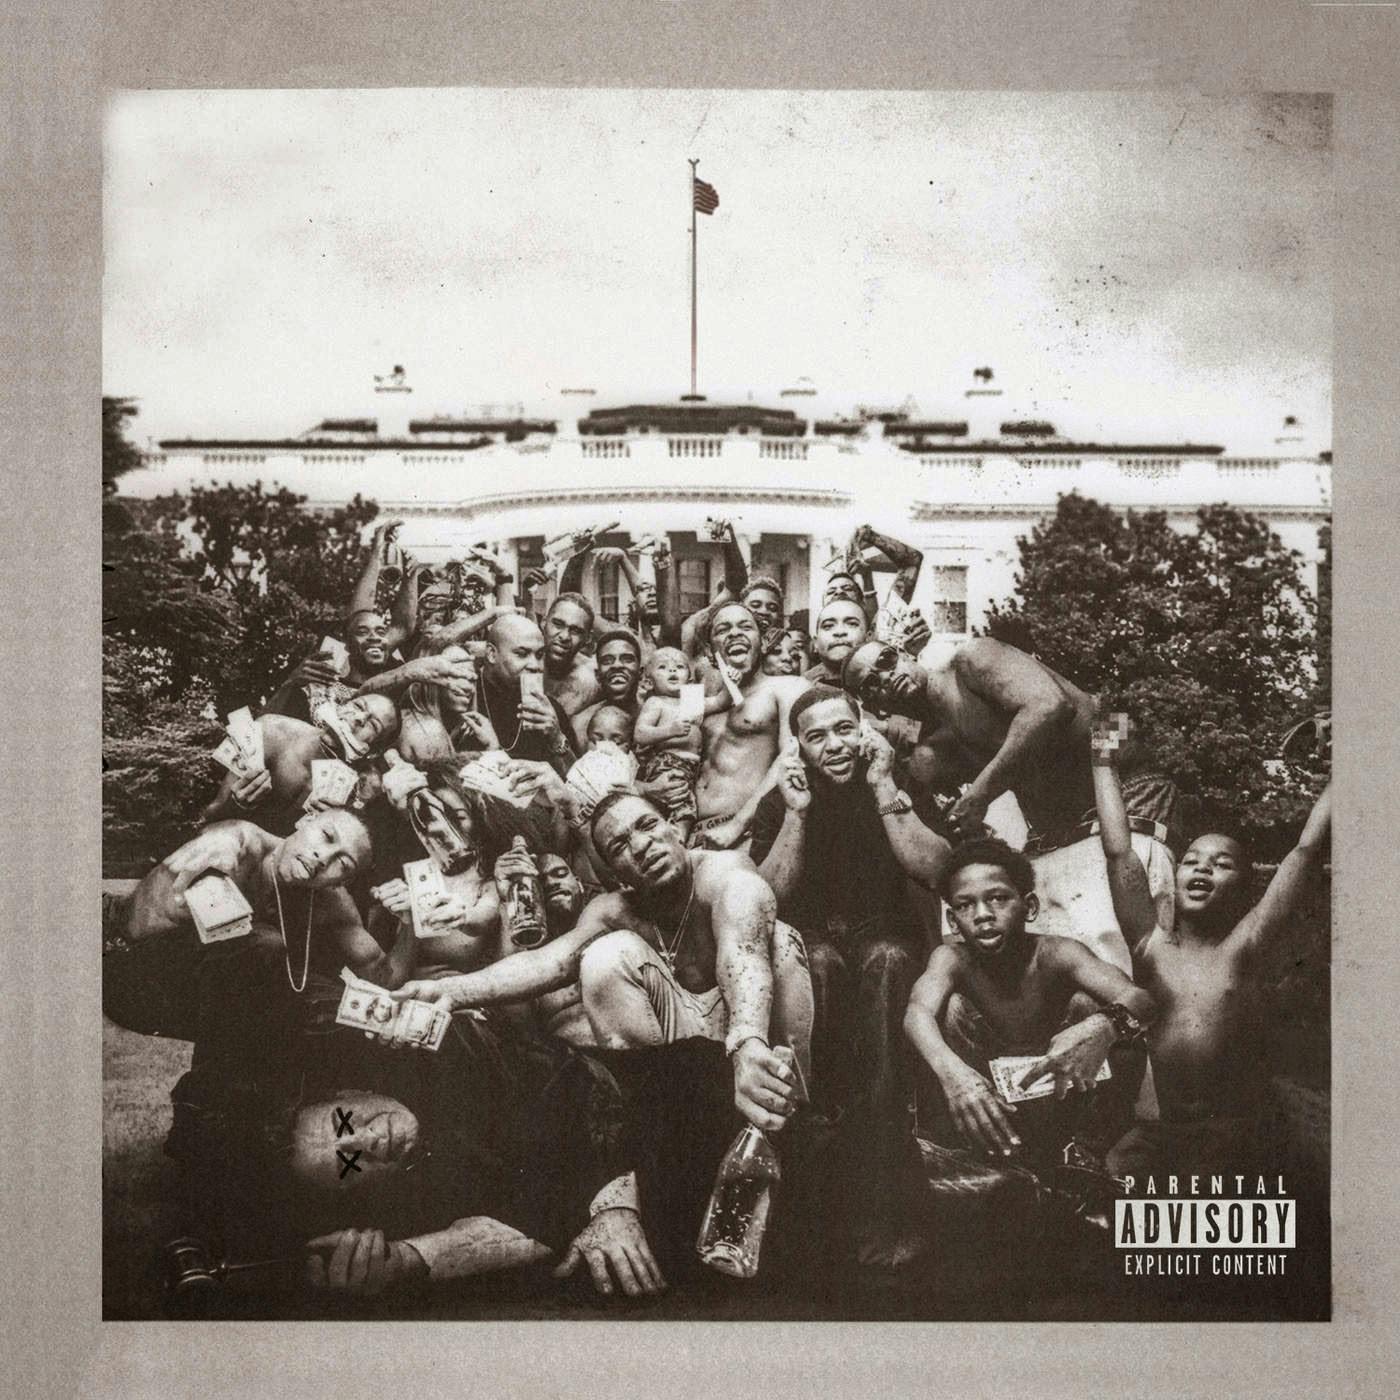 To Pimp a Butterfly album cover by Kendrick Lamar.